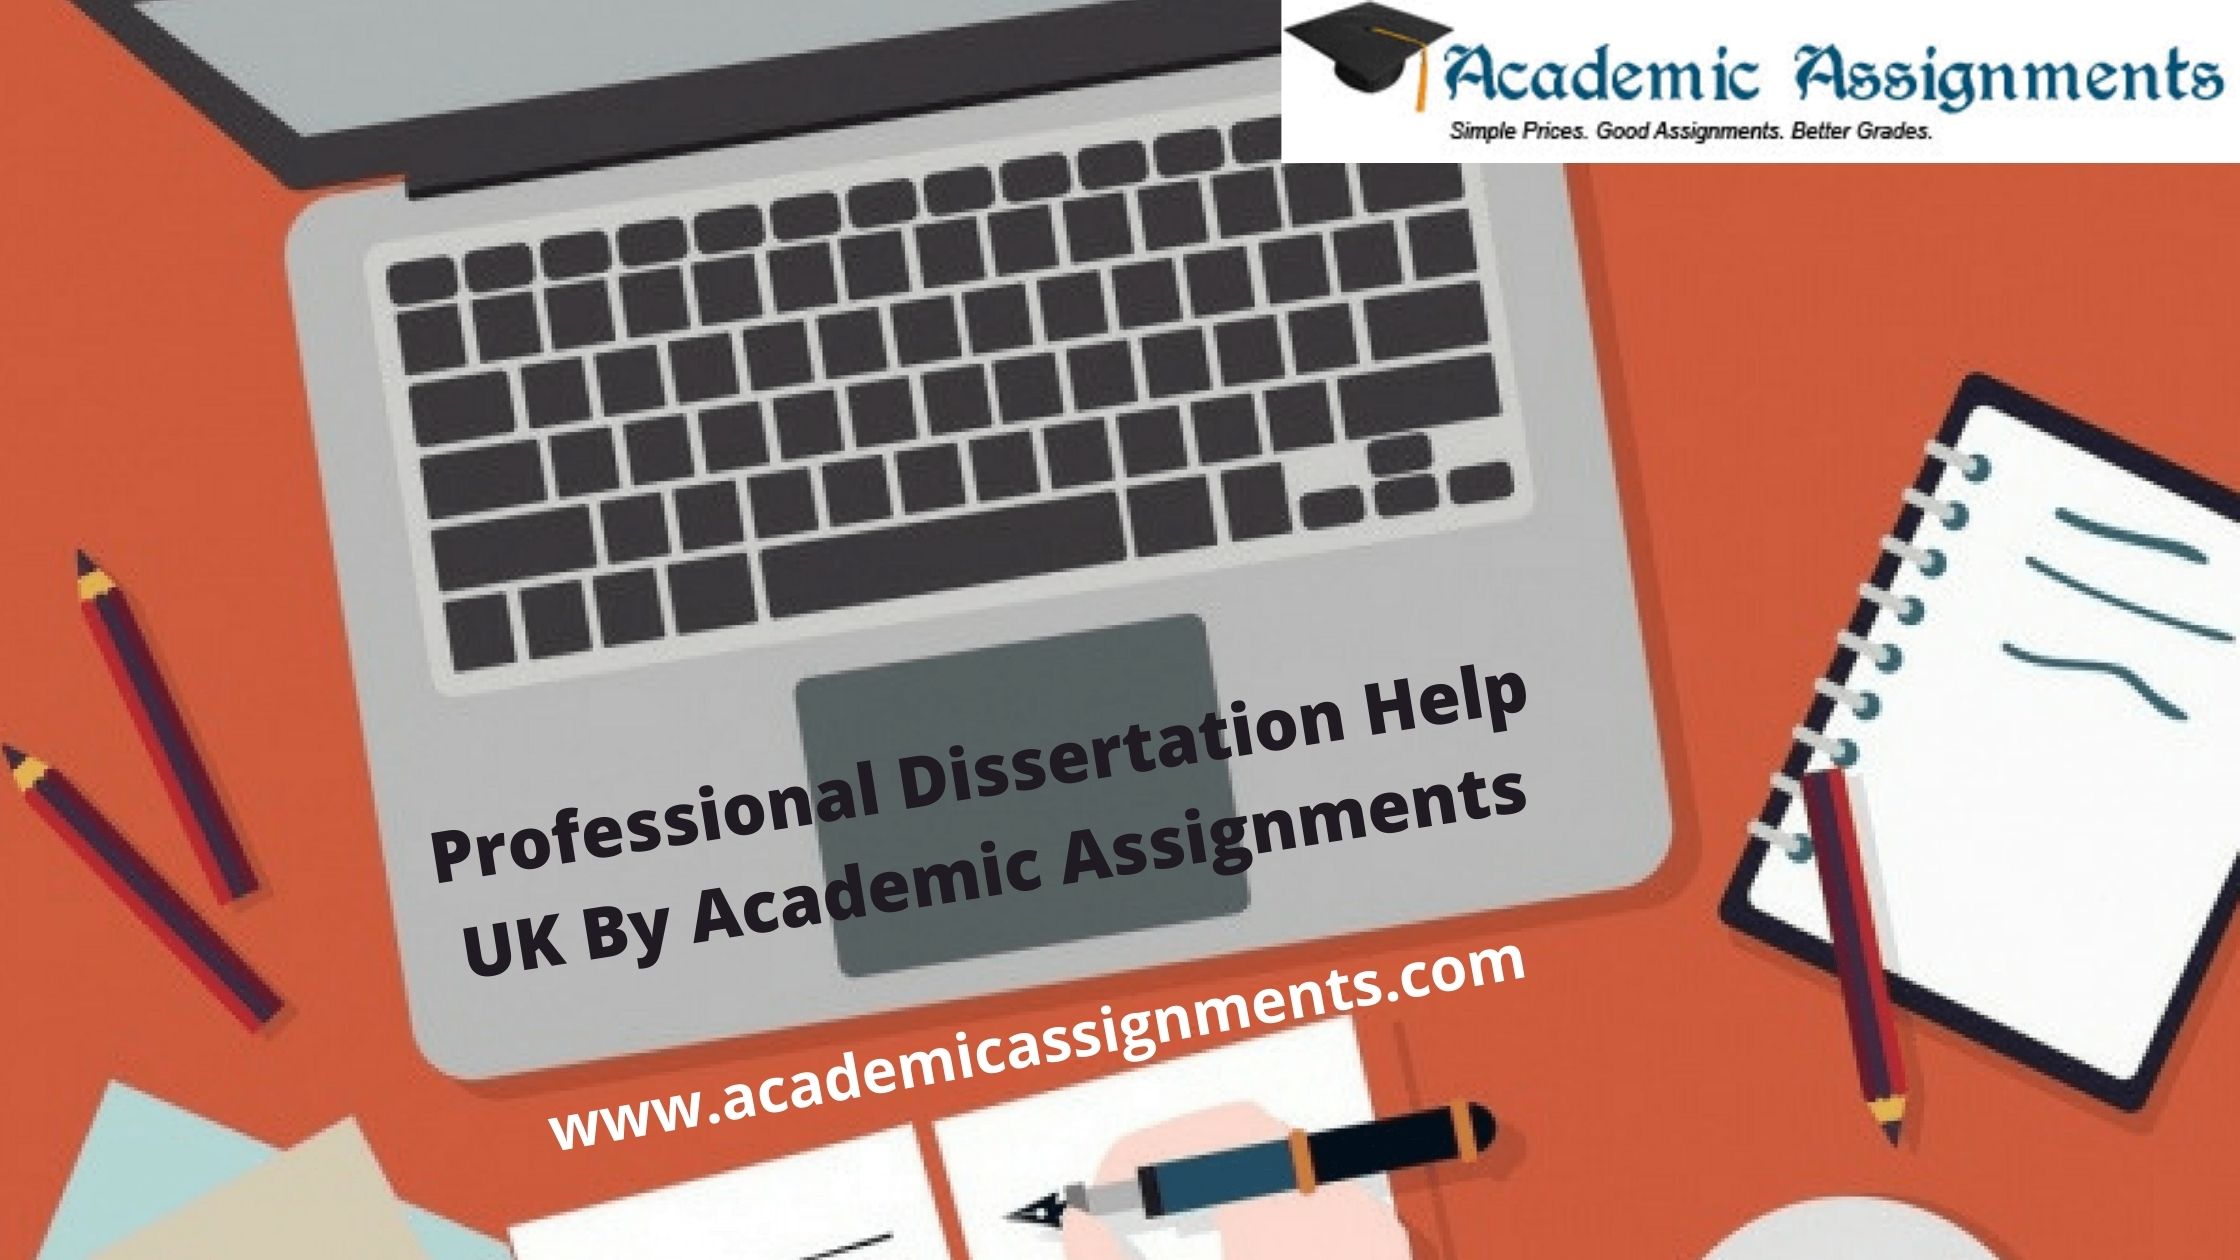 Professional Dissertation Help UK By Academic Assignments